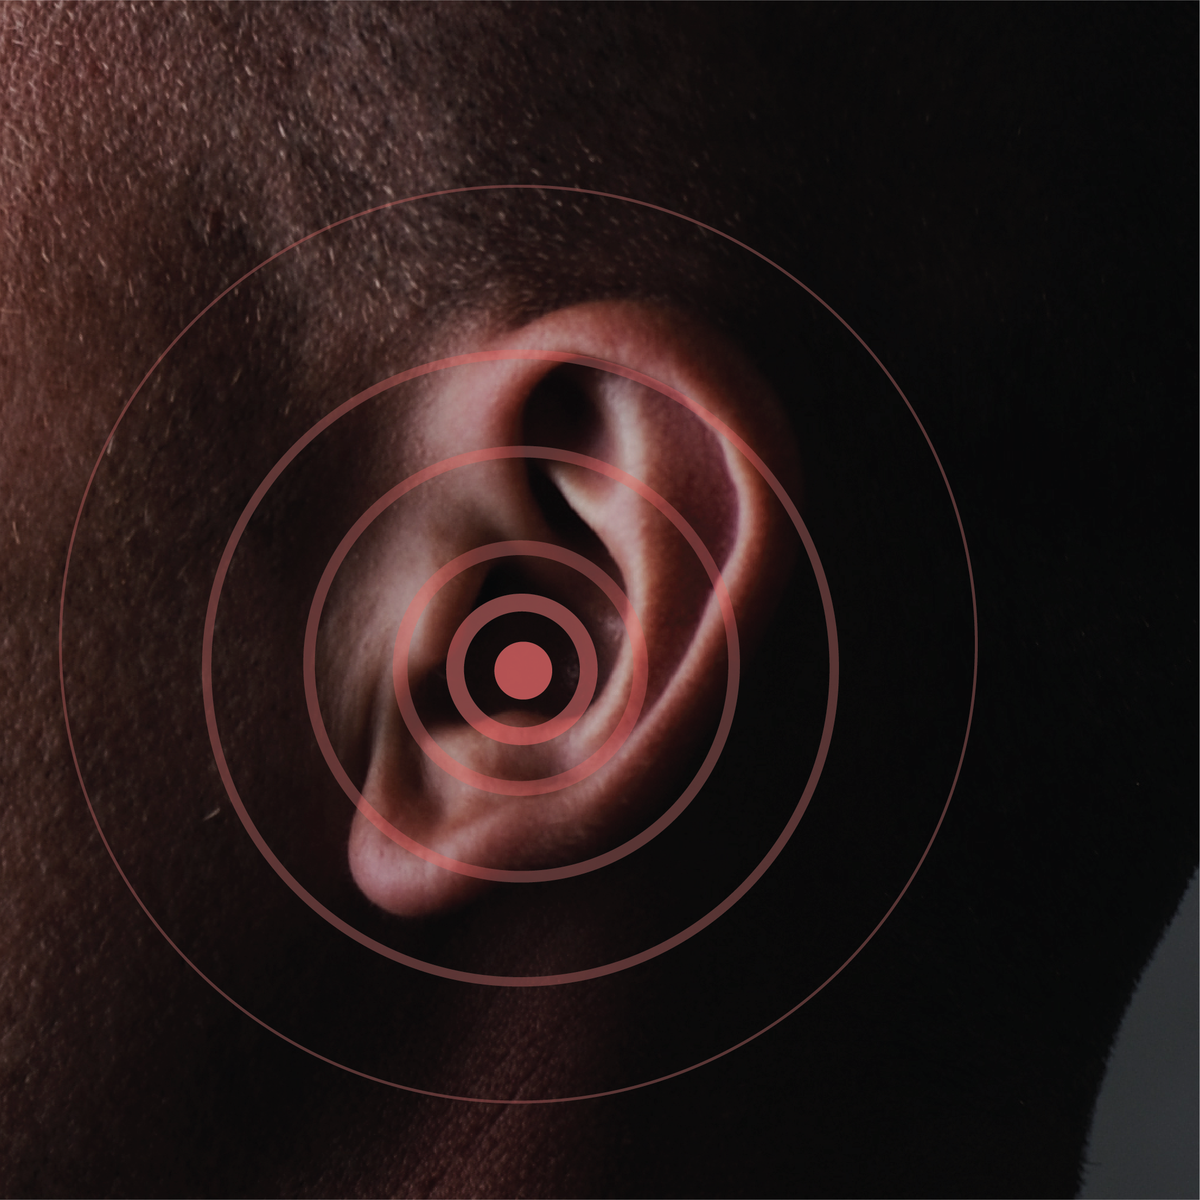 A person’s ear with red circles signifying tinnitus